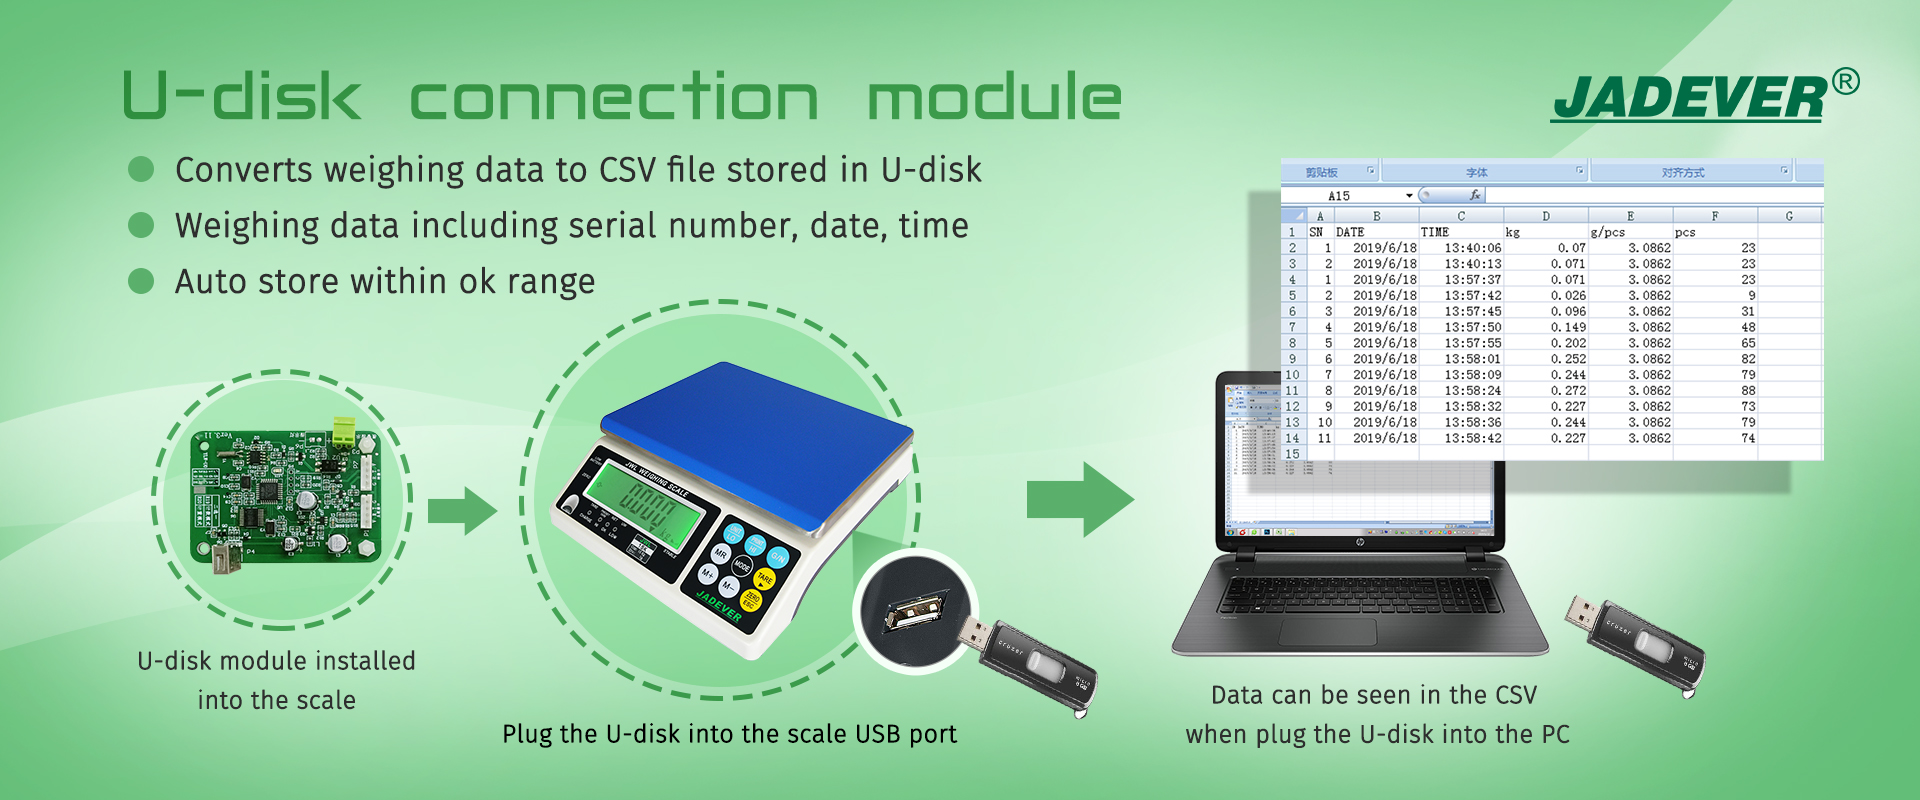 Jadever JWN can convert weighing data to CSV file stored in U-disk